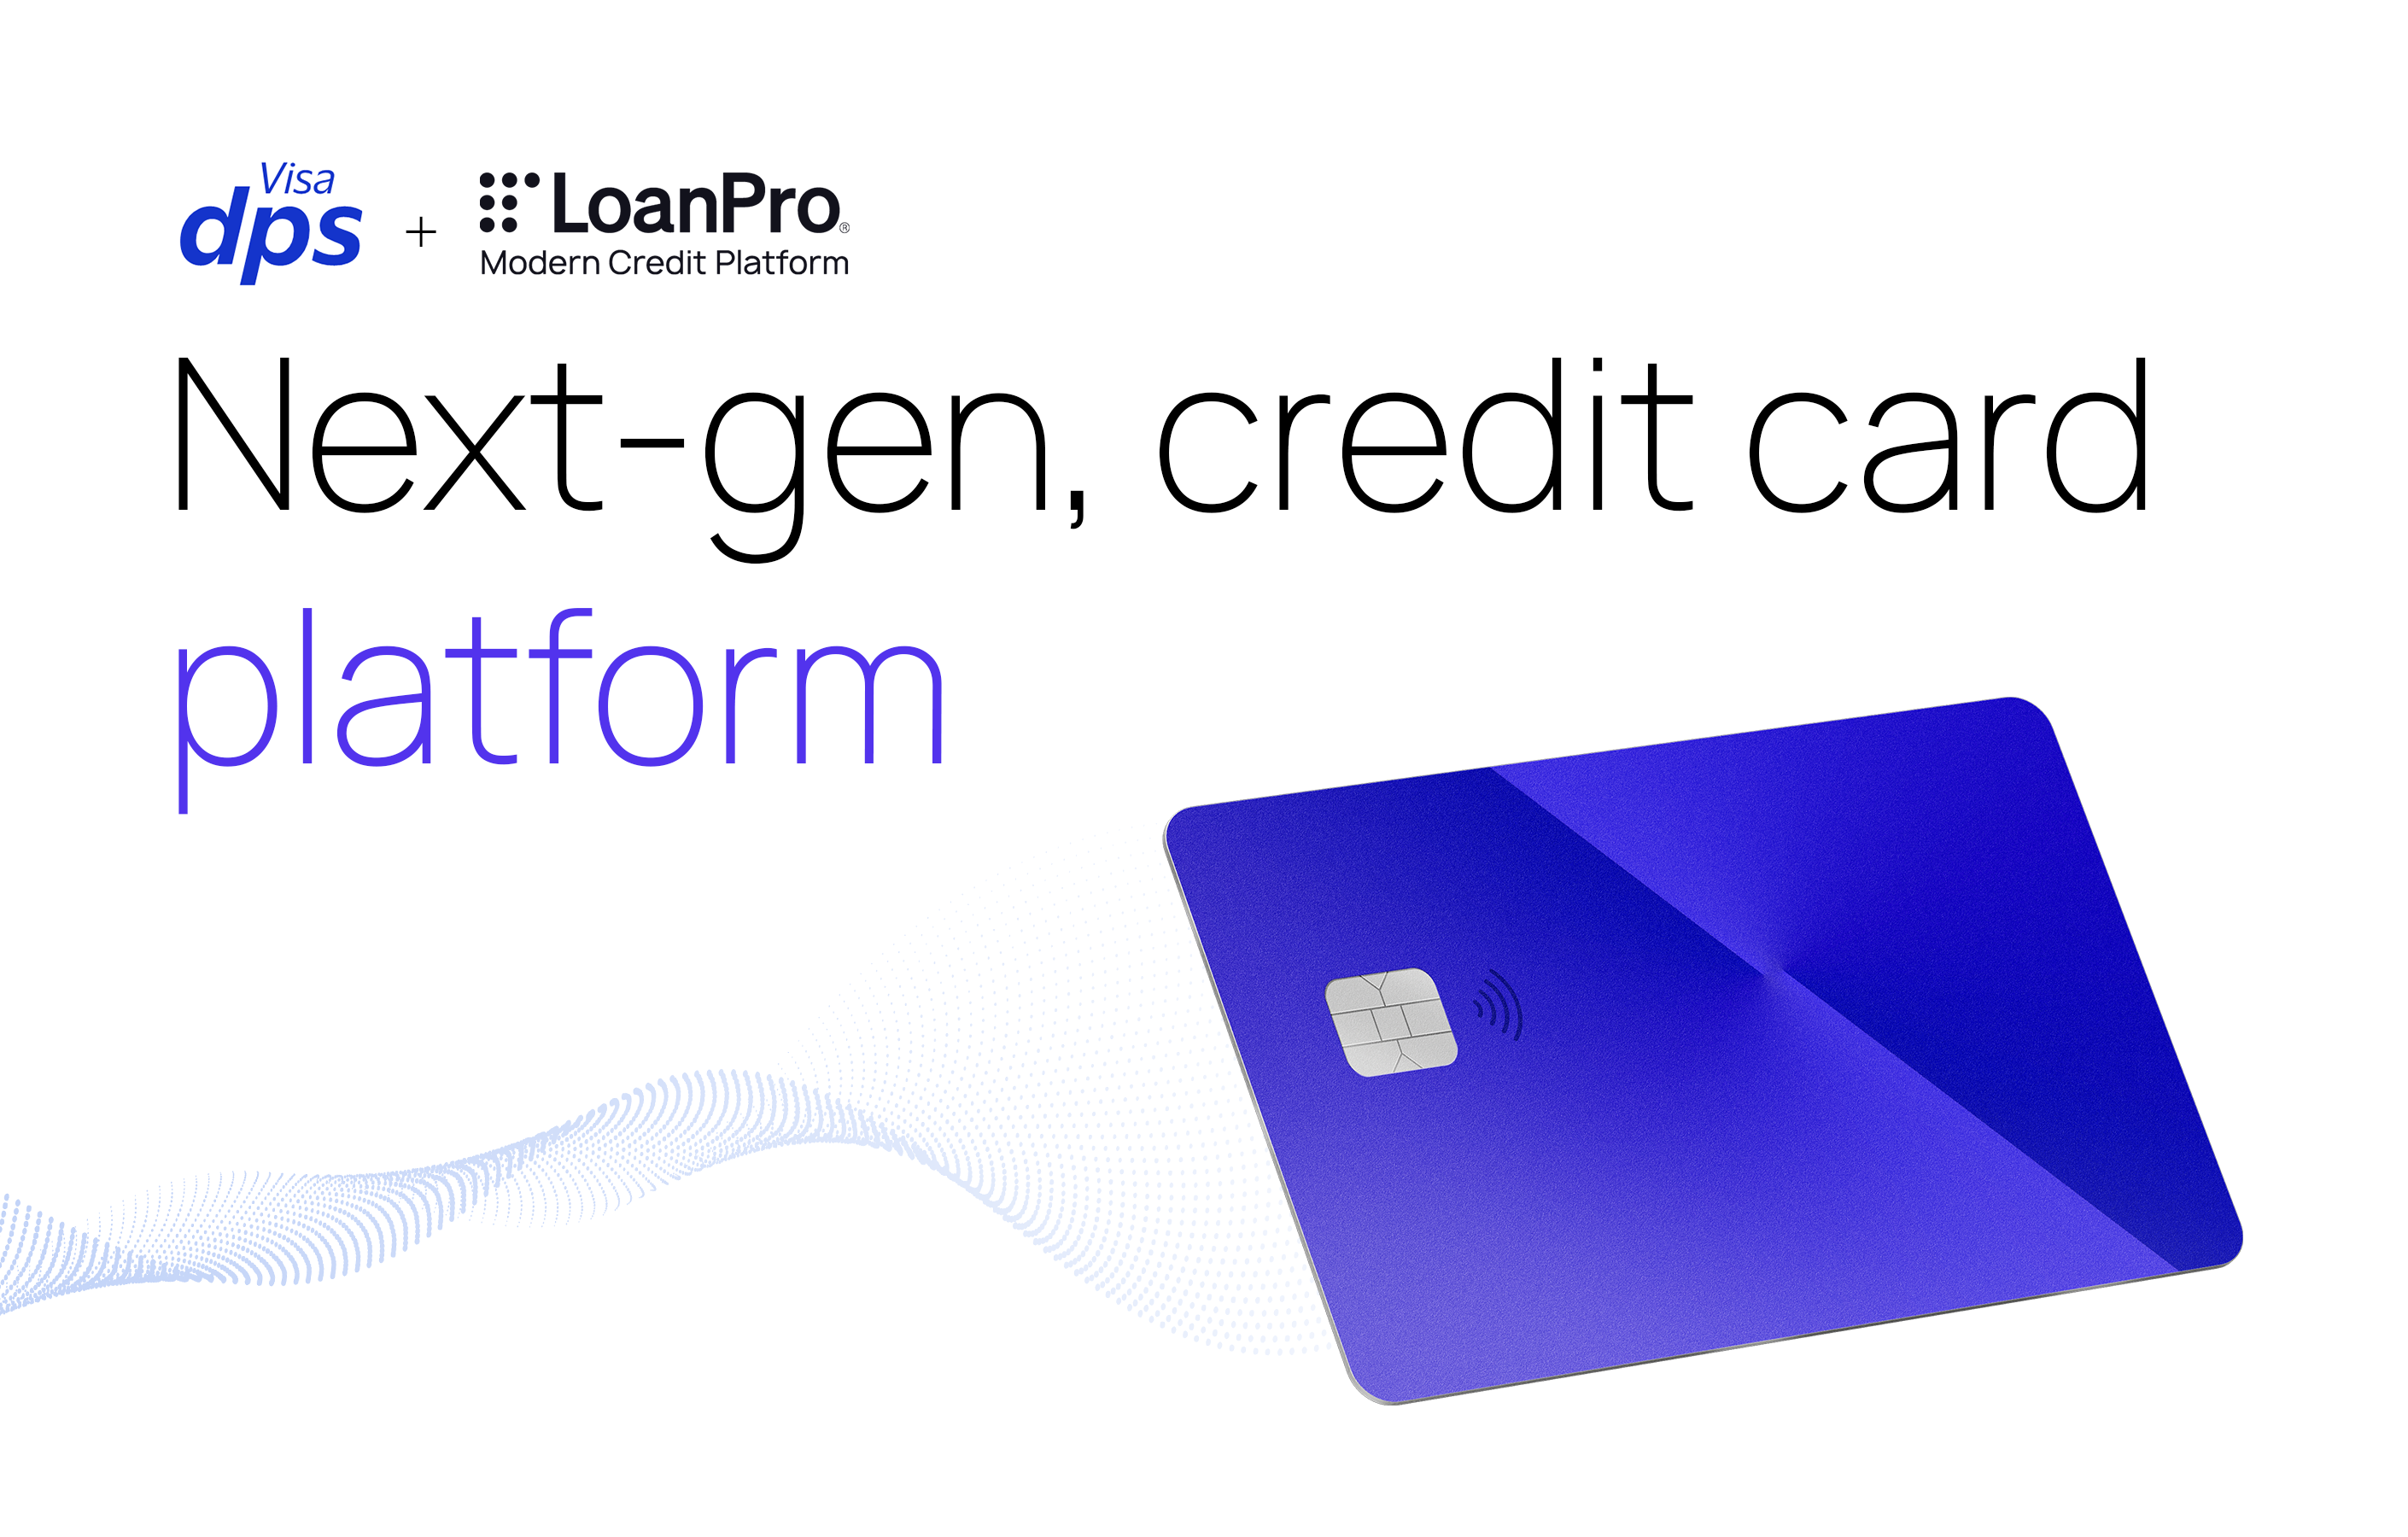 LoanPro integrates with Visa DPS to enhance their next-generation end-to-end credit card platform